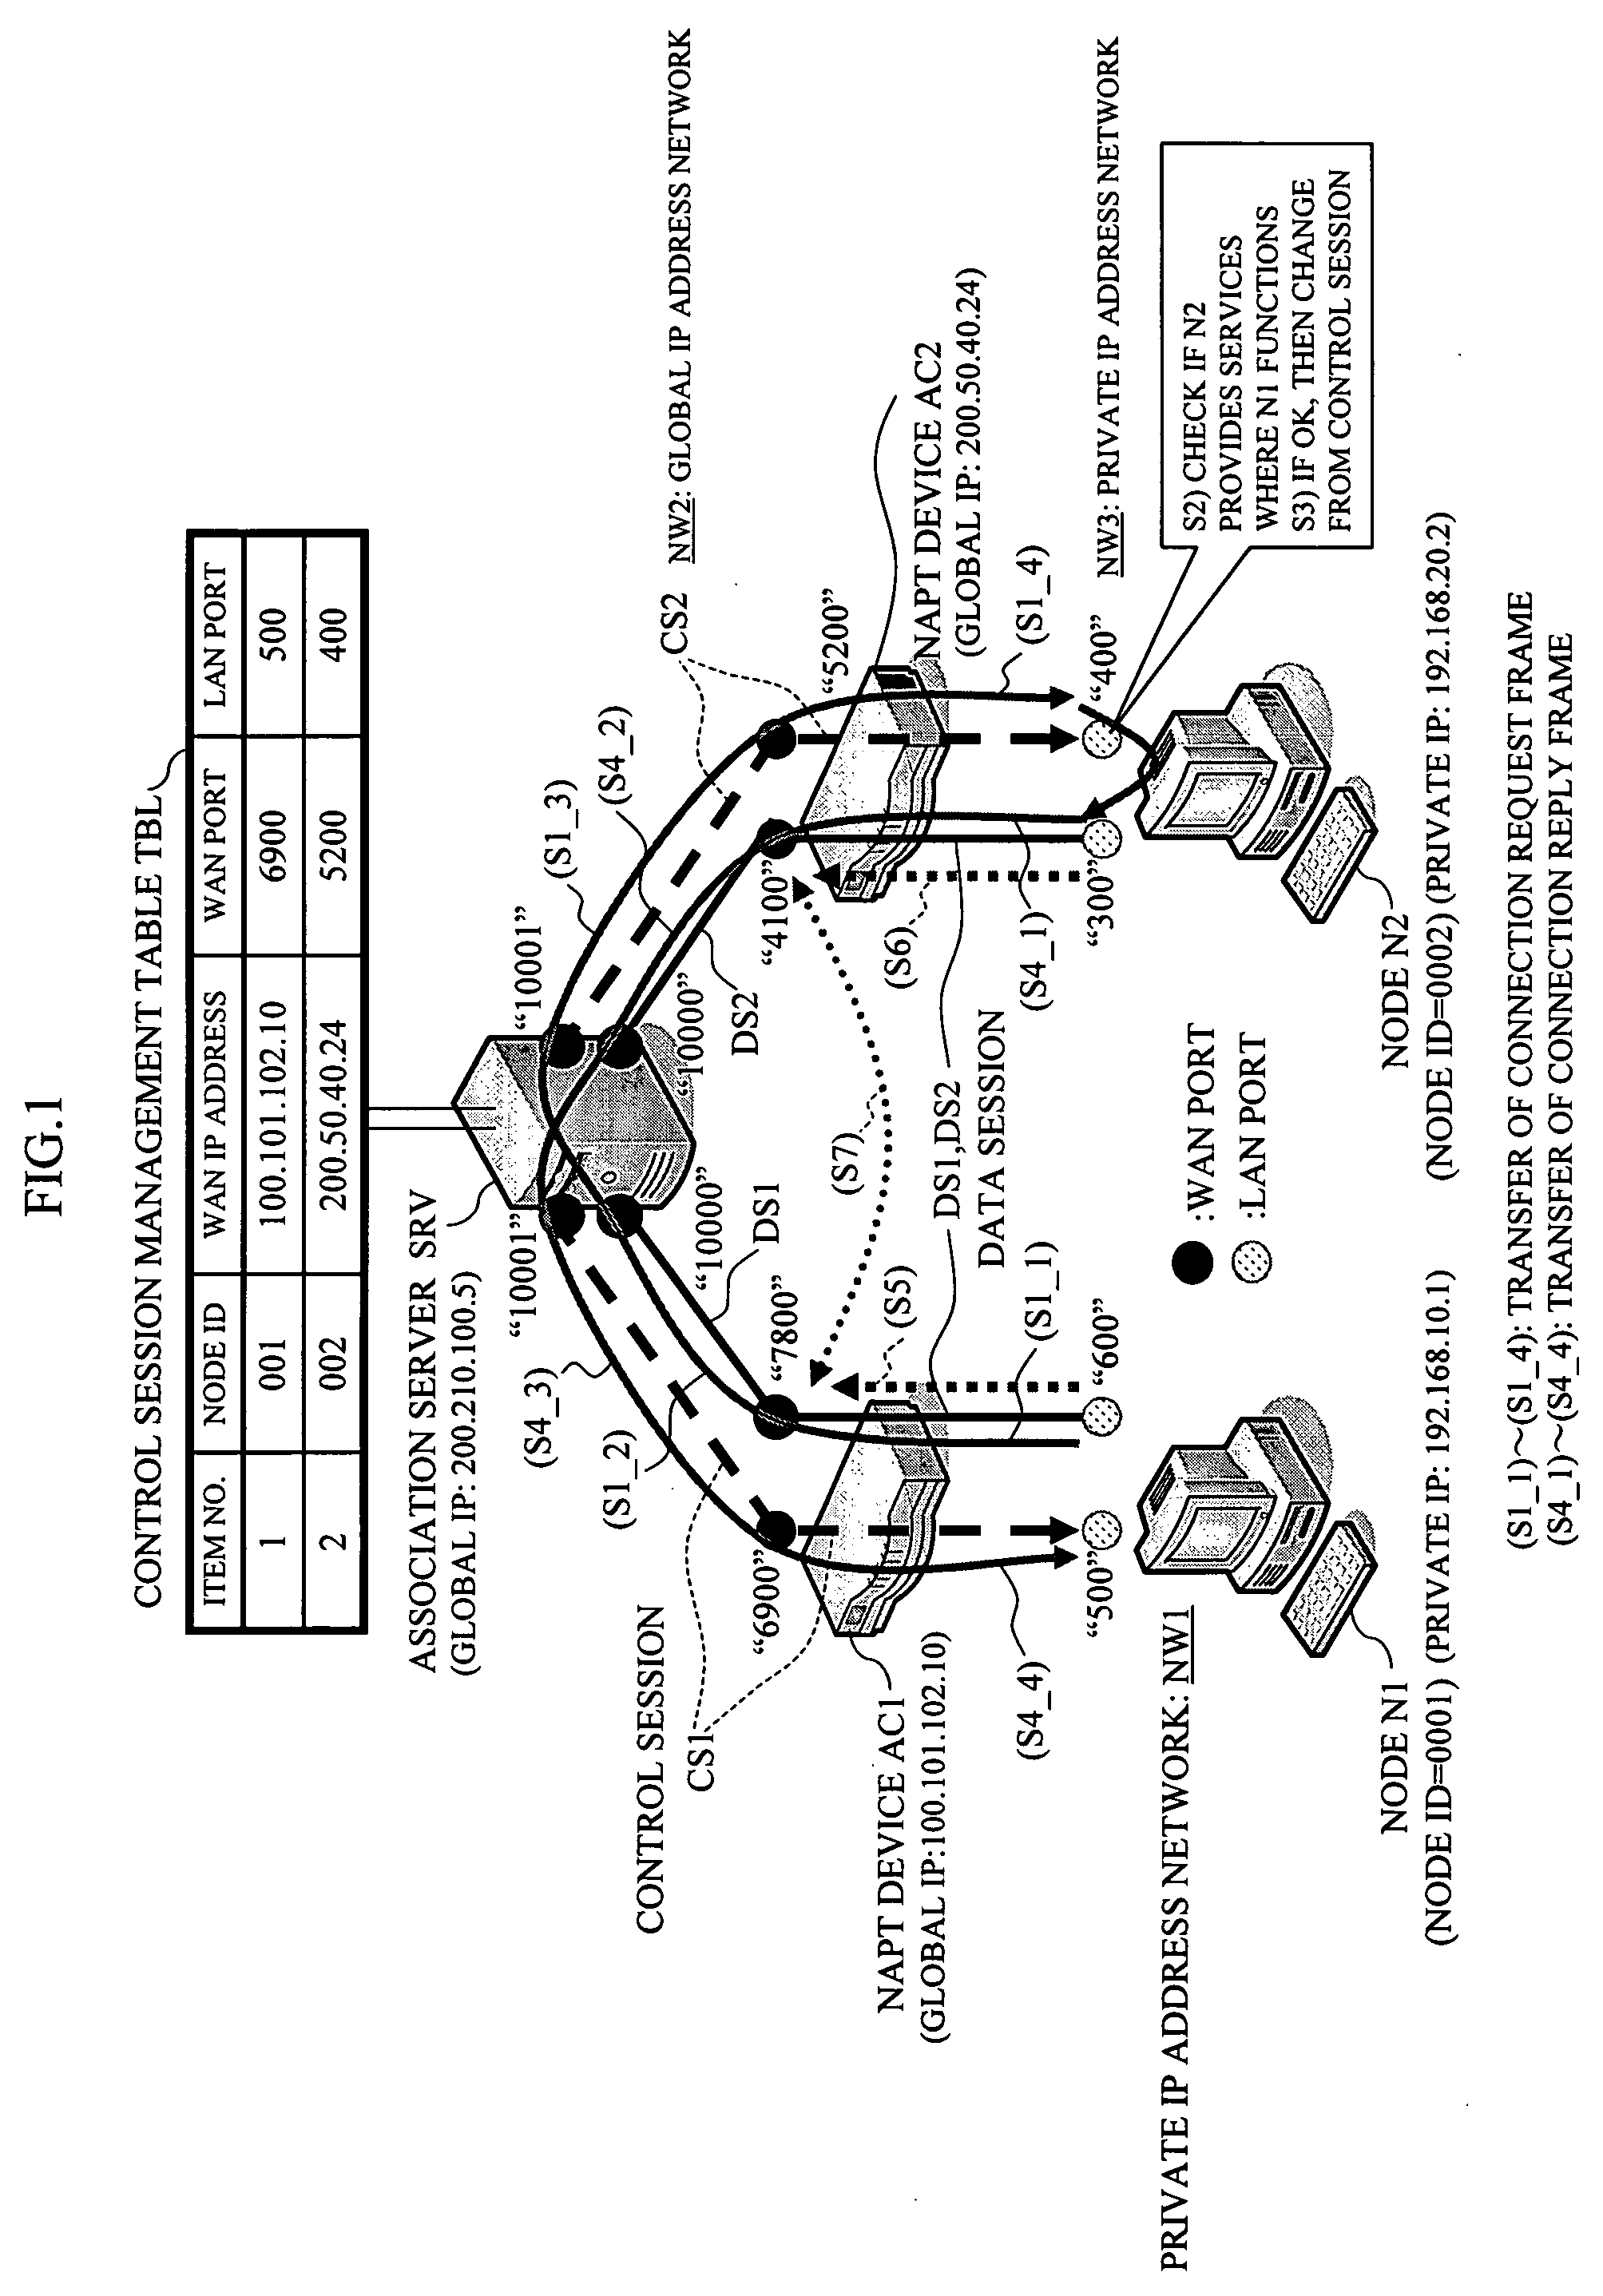 Inter-node connection method and apparatus